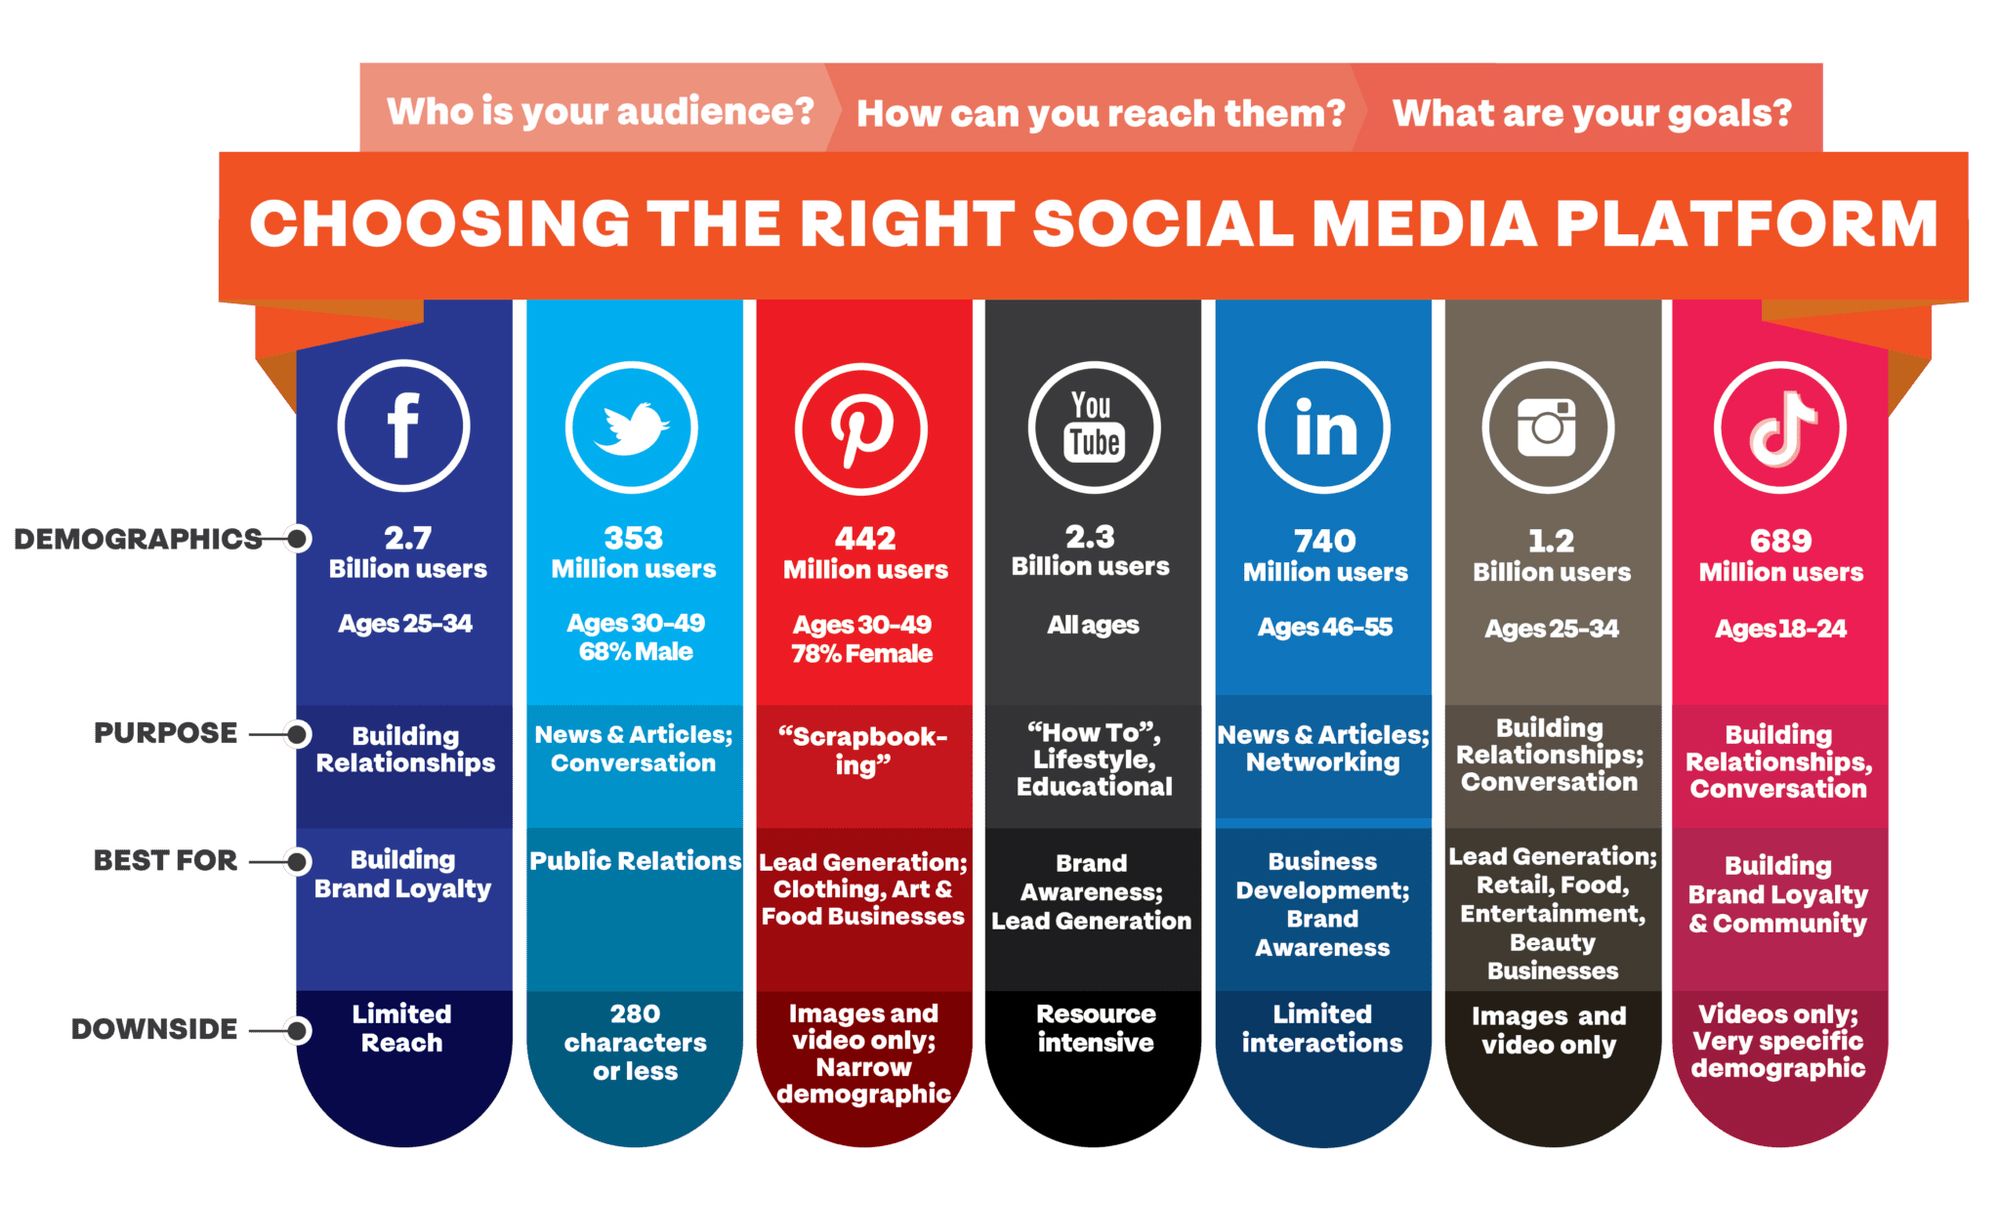 Audience demographics for different social media platforms